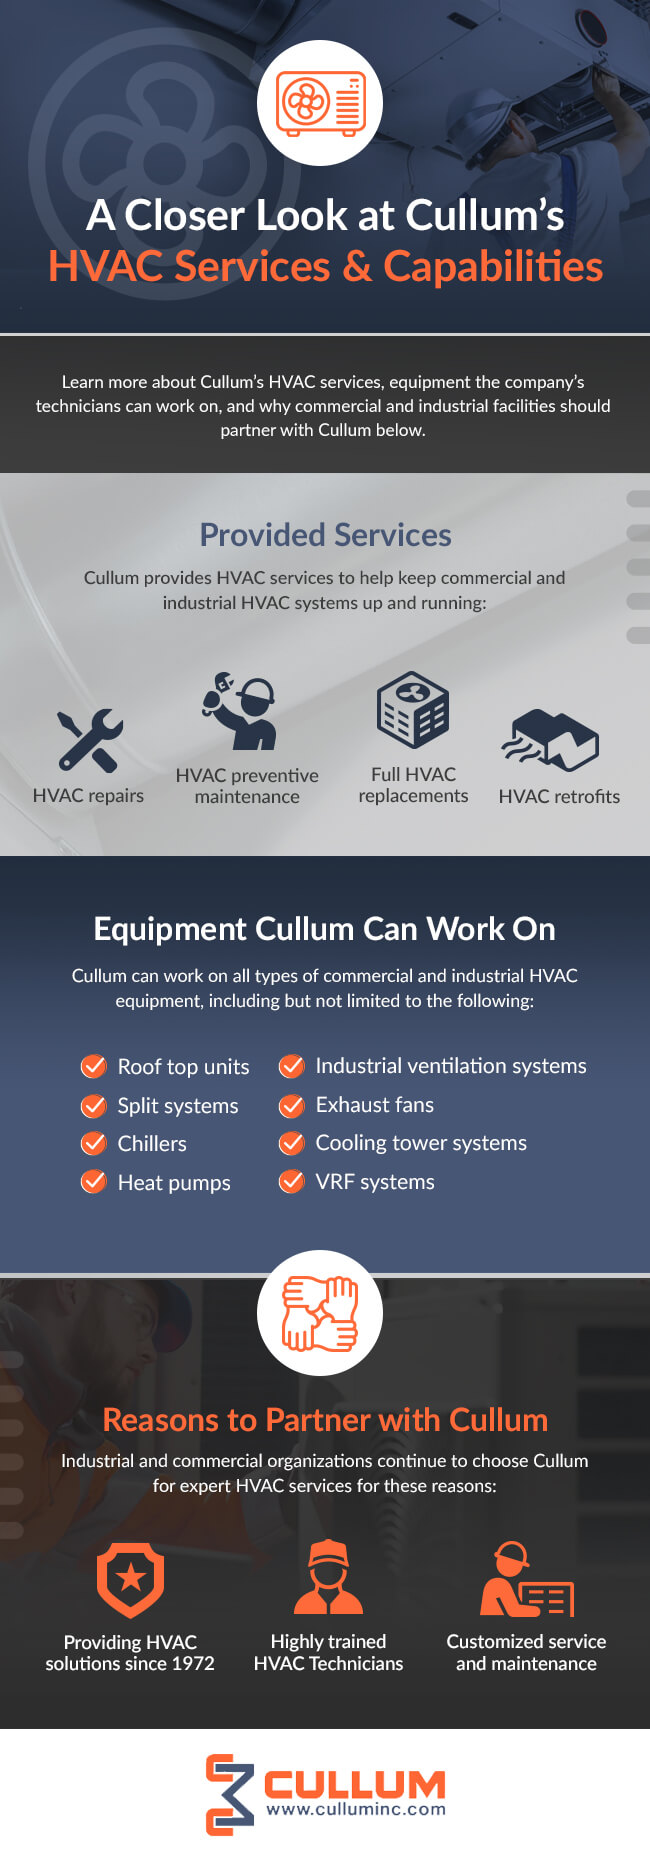 A Closer Look at Cullum’s HVAC Services and Capabilities